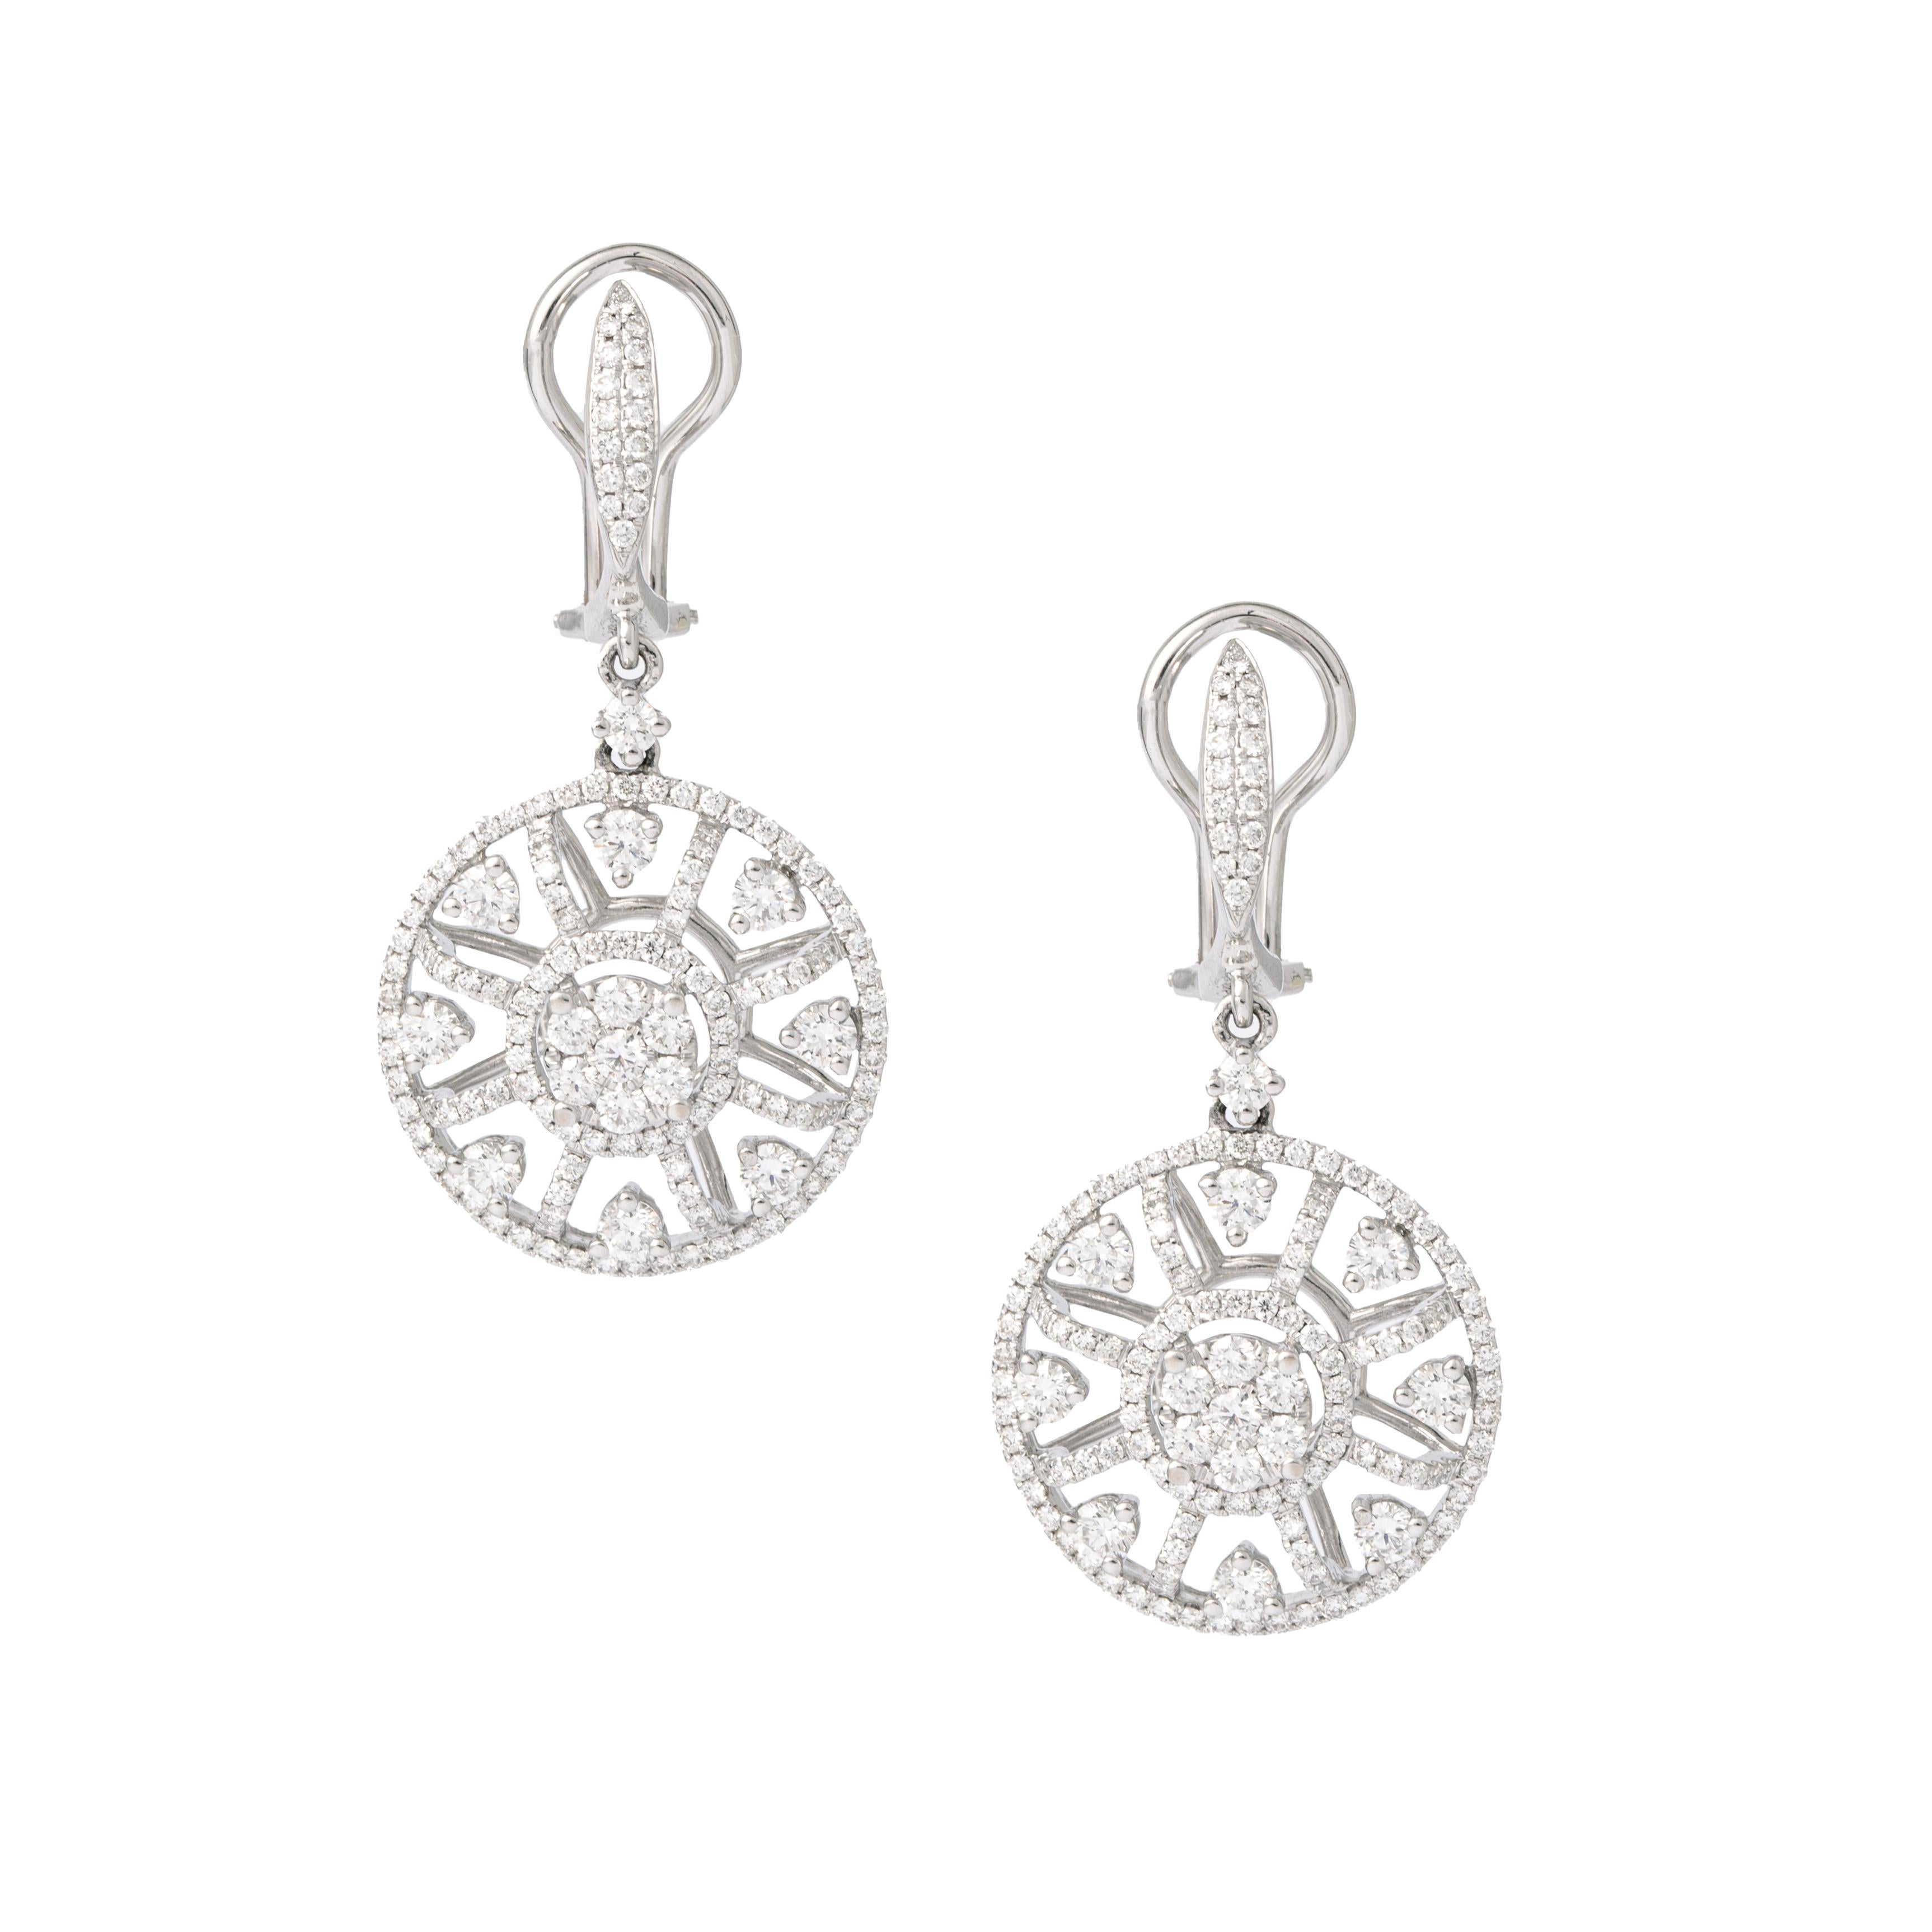 Earrings in 18kt white gold set with 312 diamonds 3.19 cts  